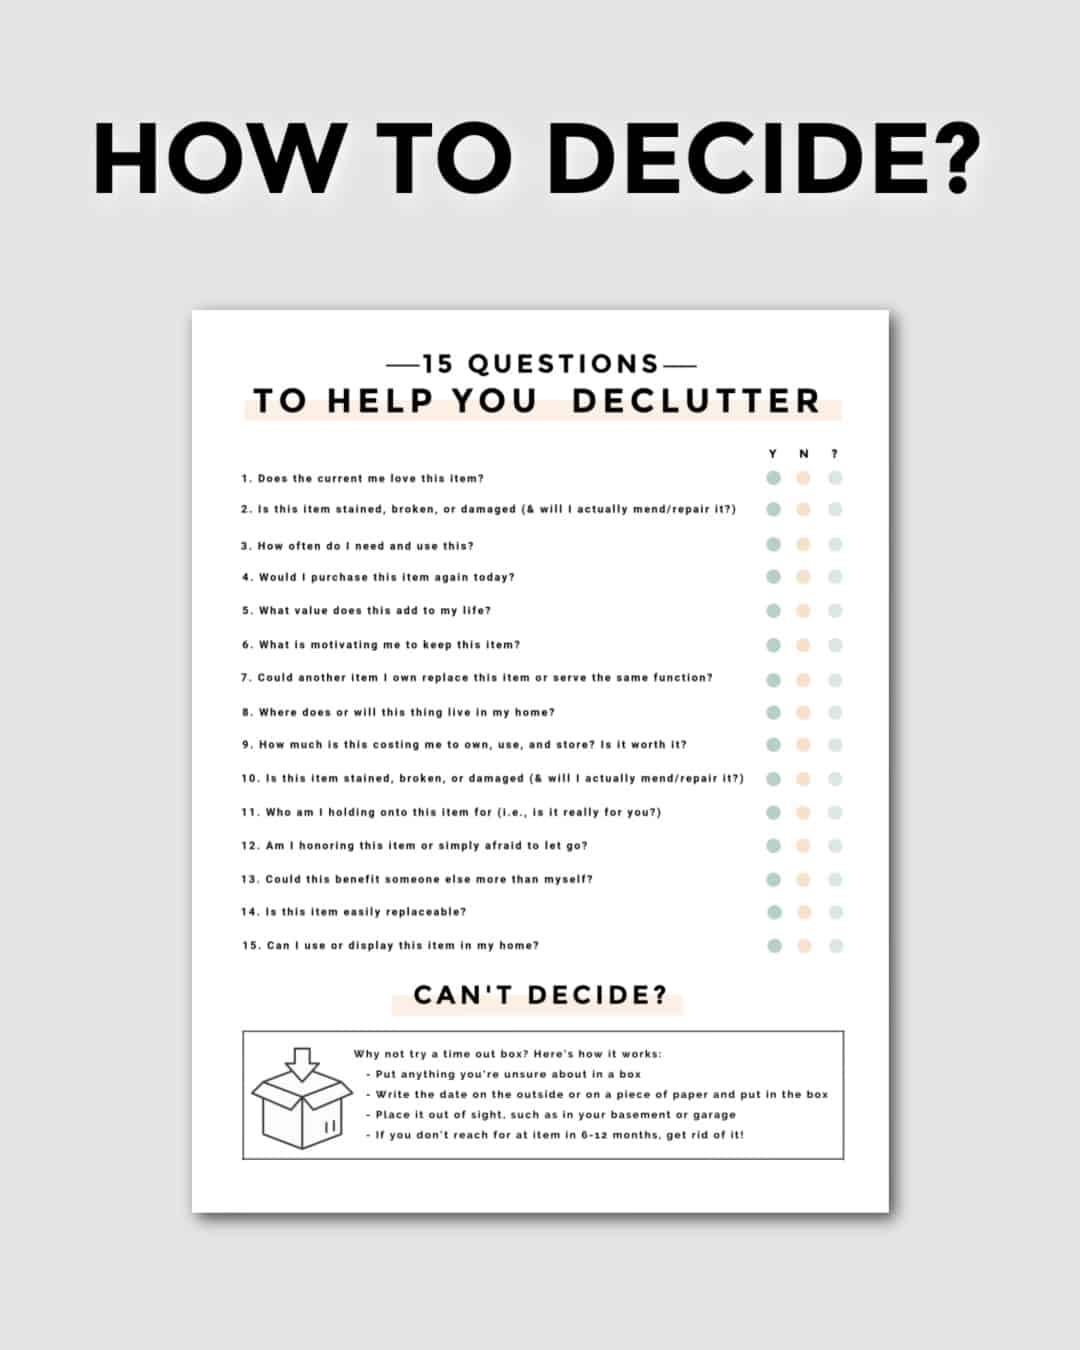 A checklist of decluttering questions to ask